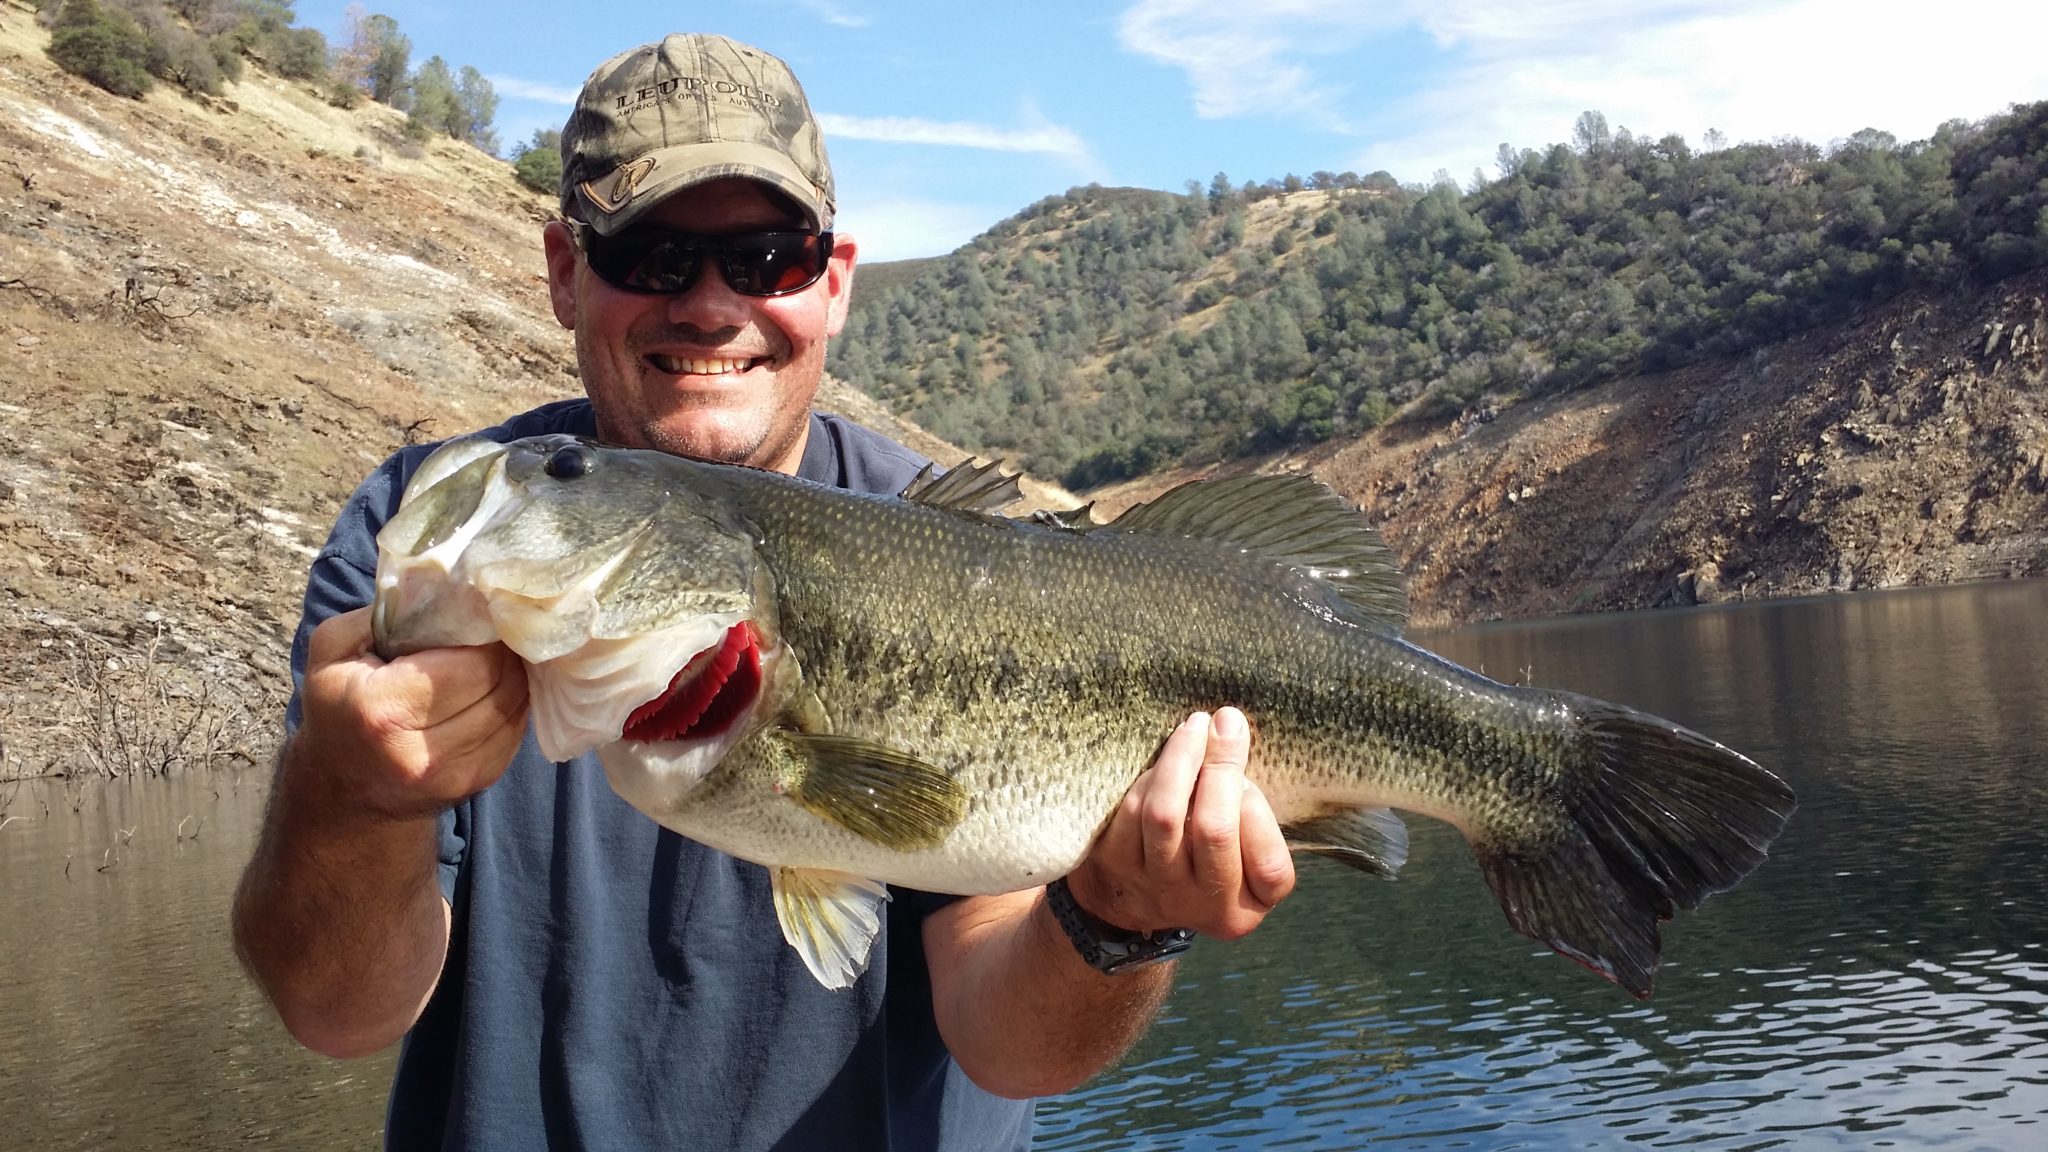 New Melones Fishing Guide Service. Catching bass and having a good